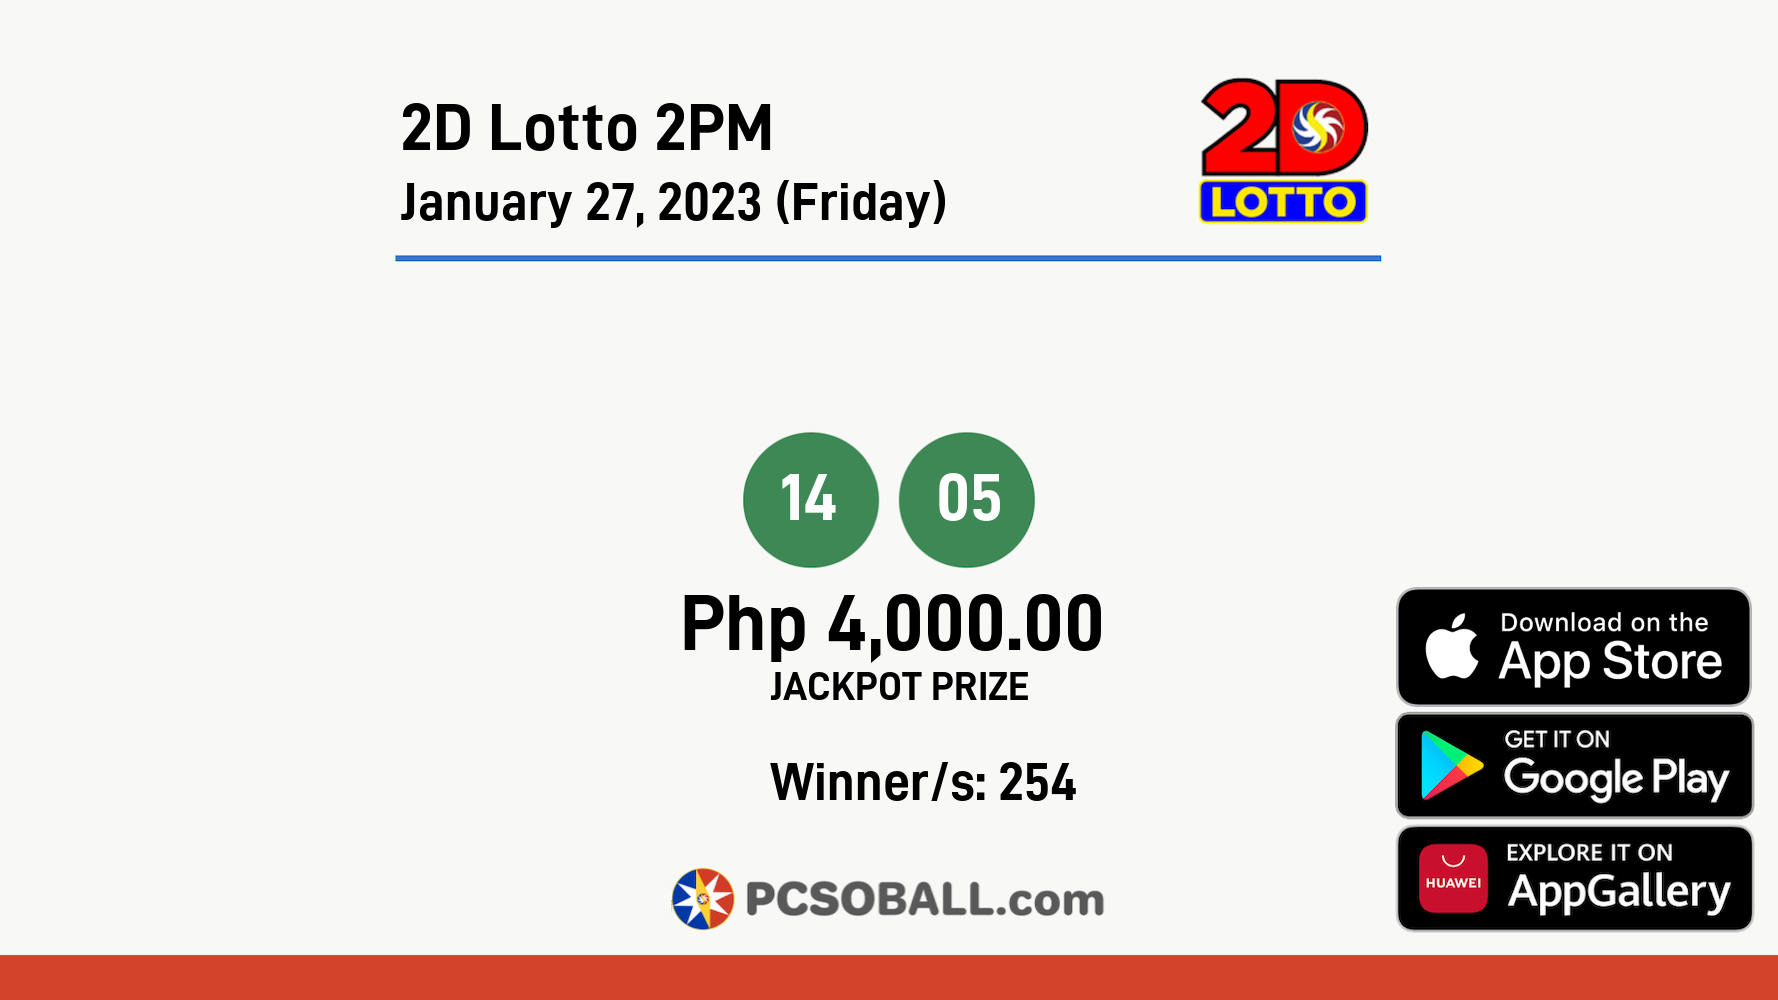 2D Lotto 2PM January 27, 2023 (Friday) Result